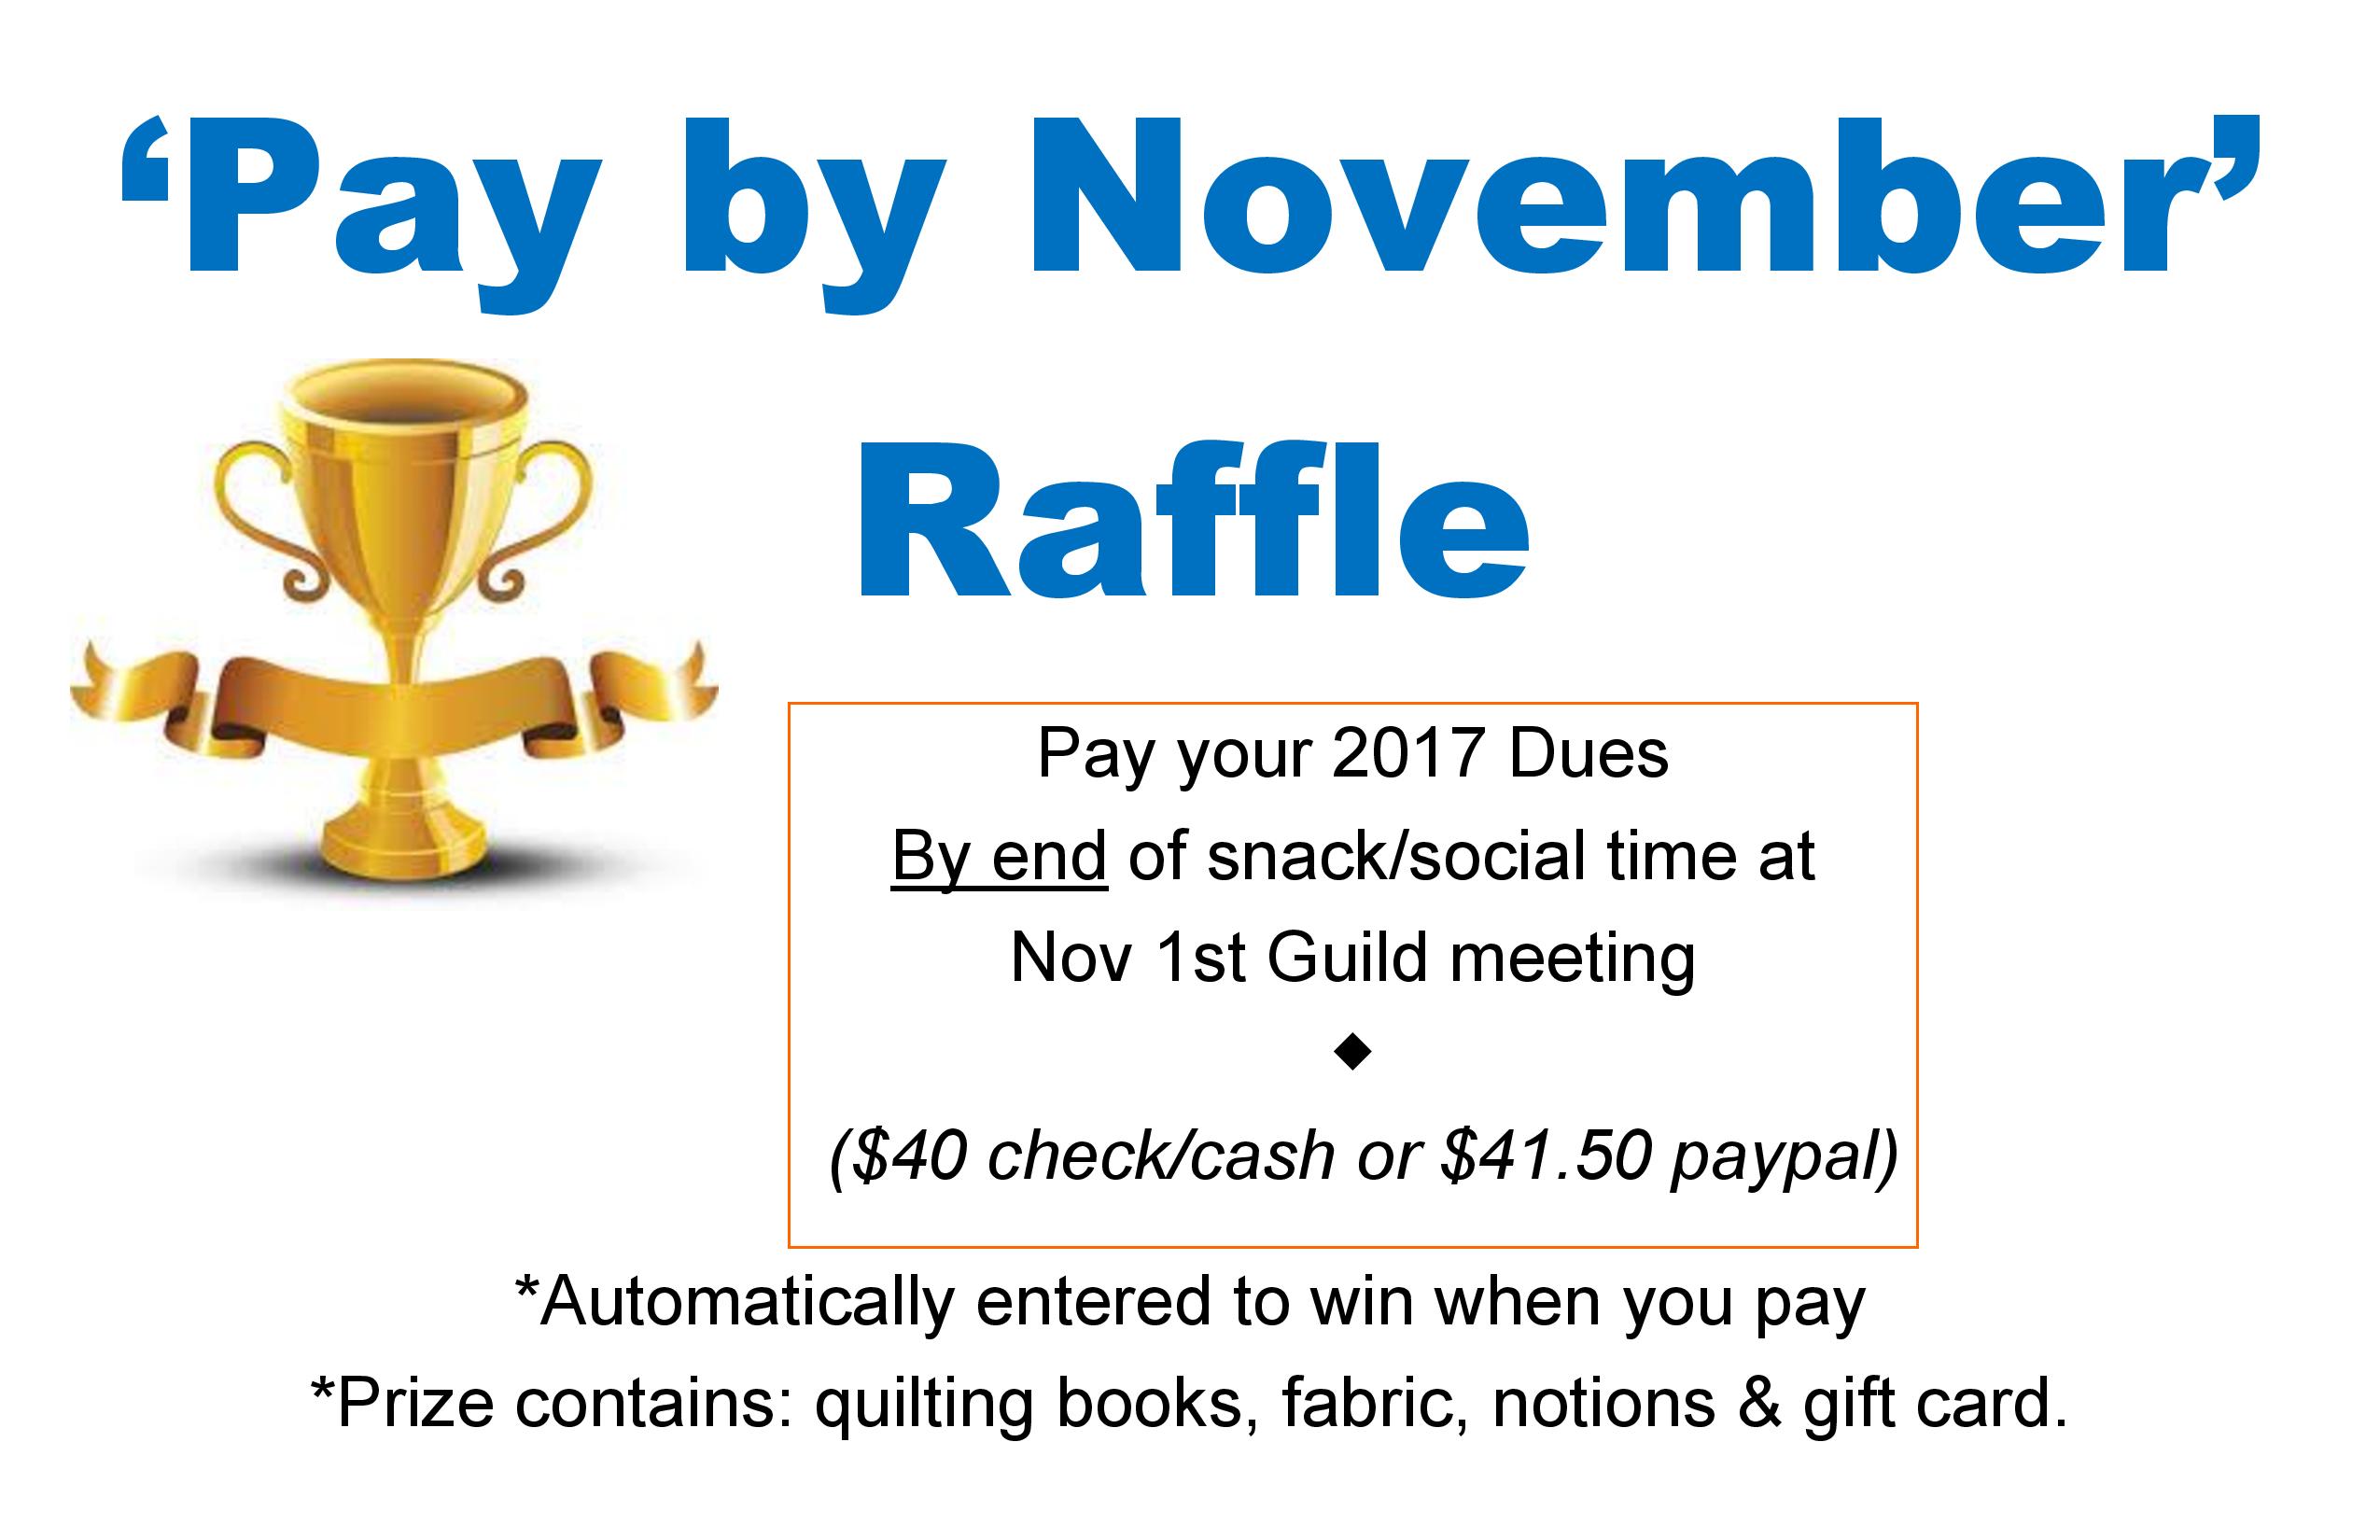 pay-by-november-raffle-page-001-2